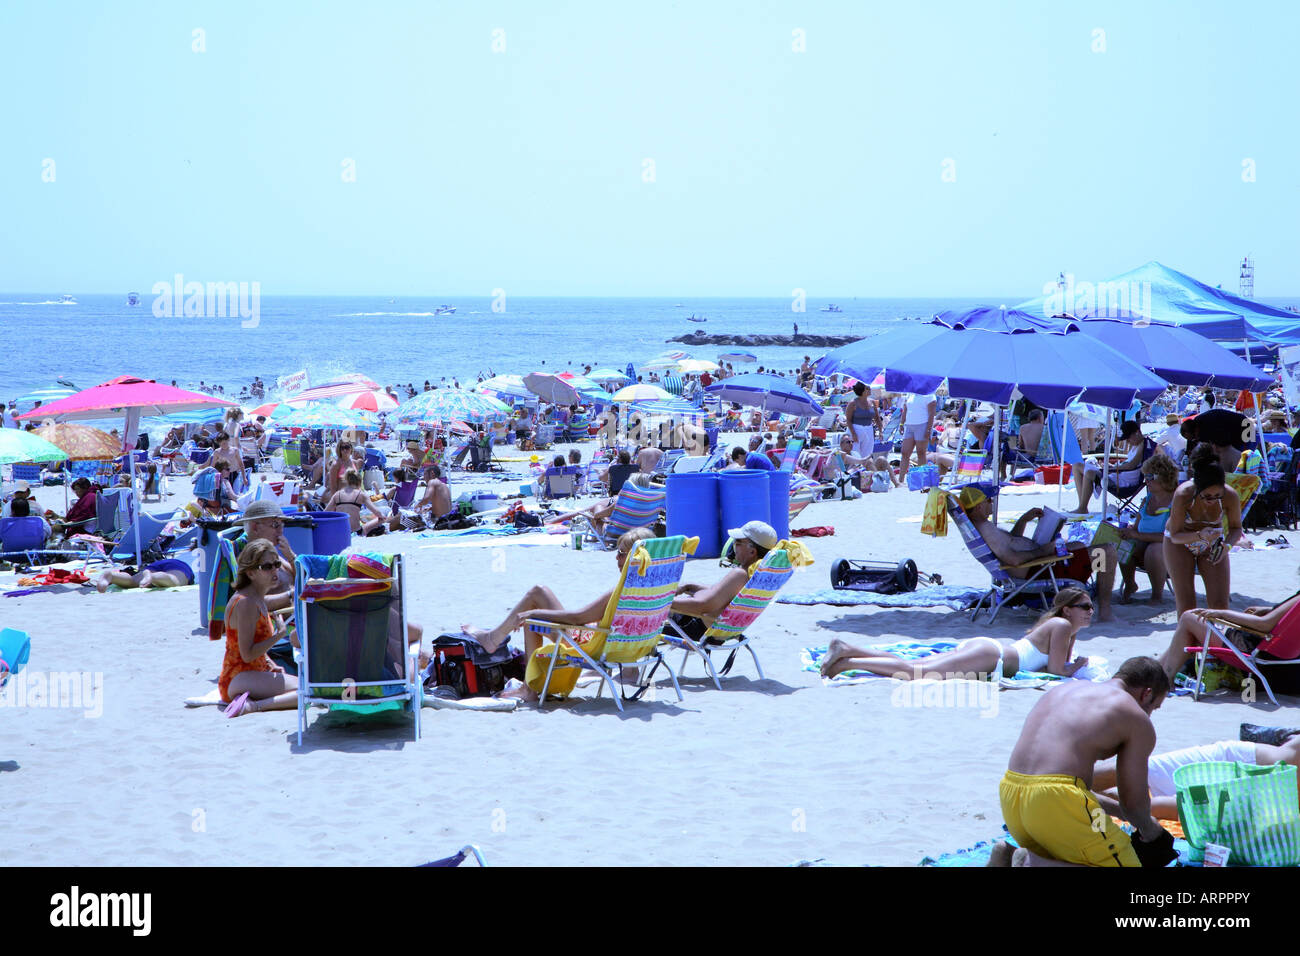 Mass of people with colorful beach umbrellas, chairs and towels on sandy beach at New Jersey shore. Stock Photo